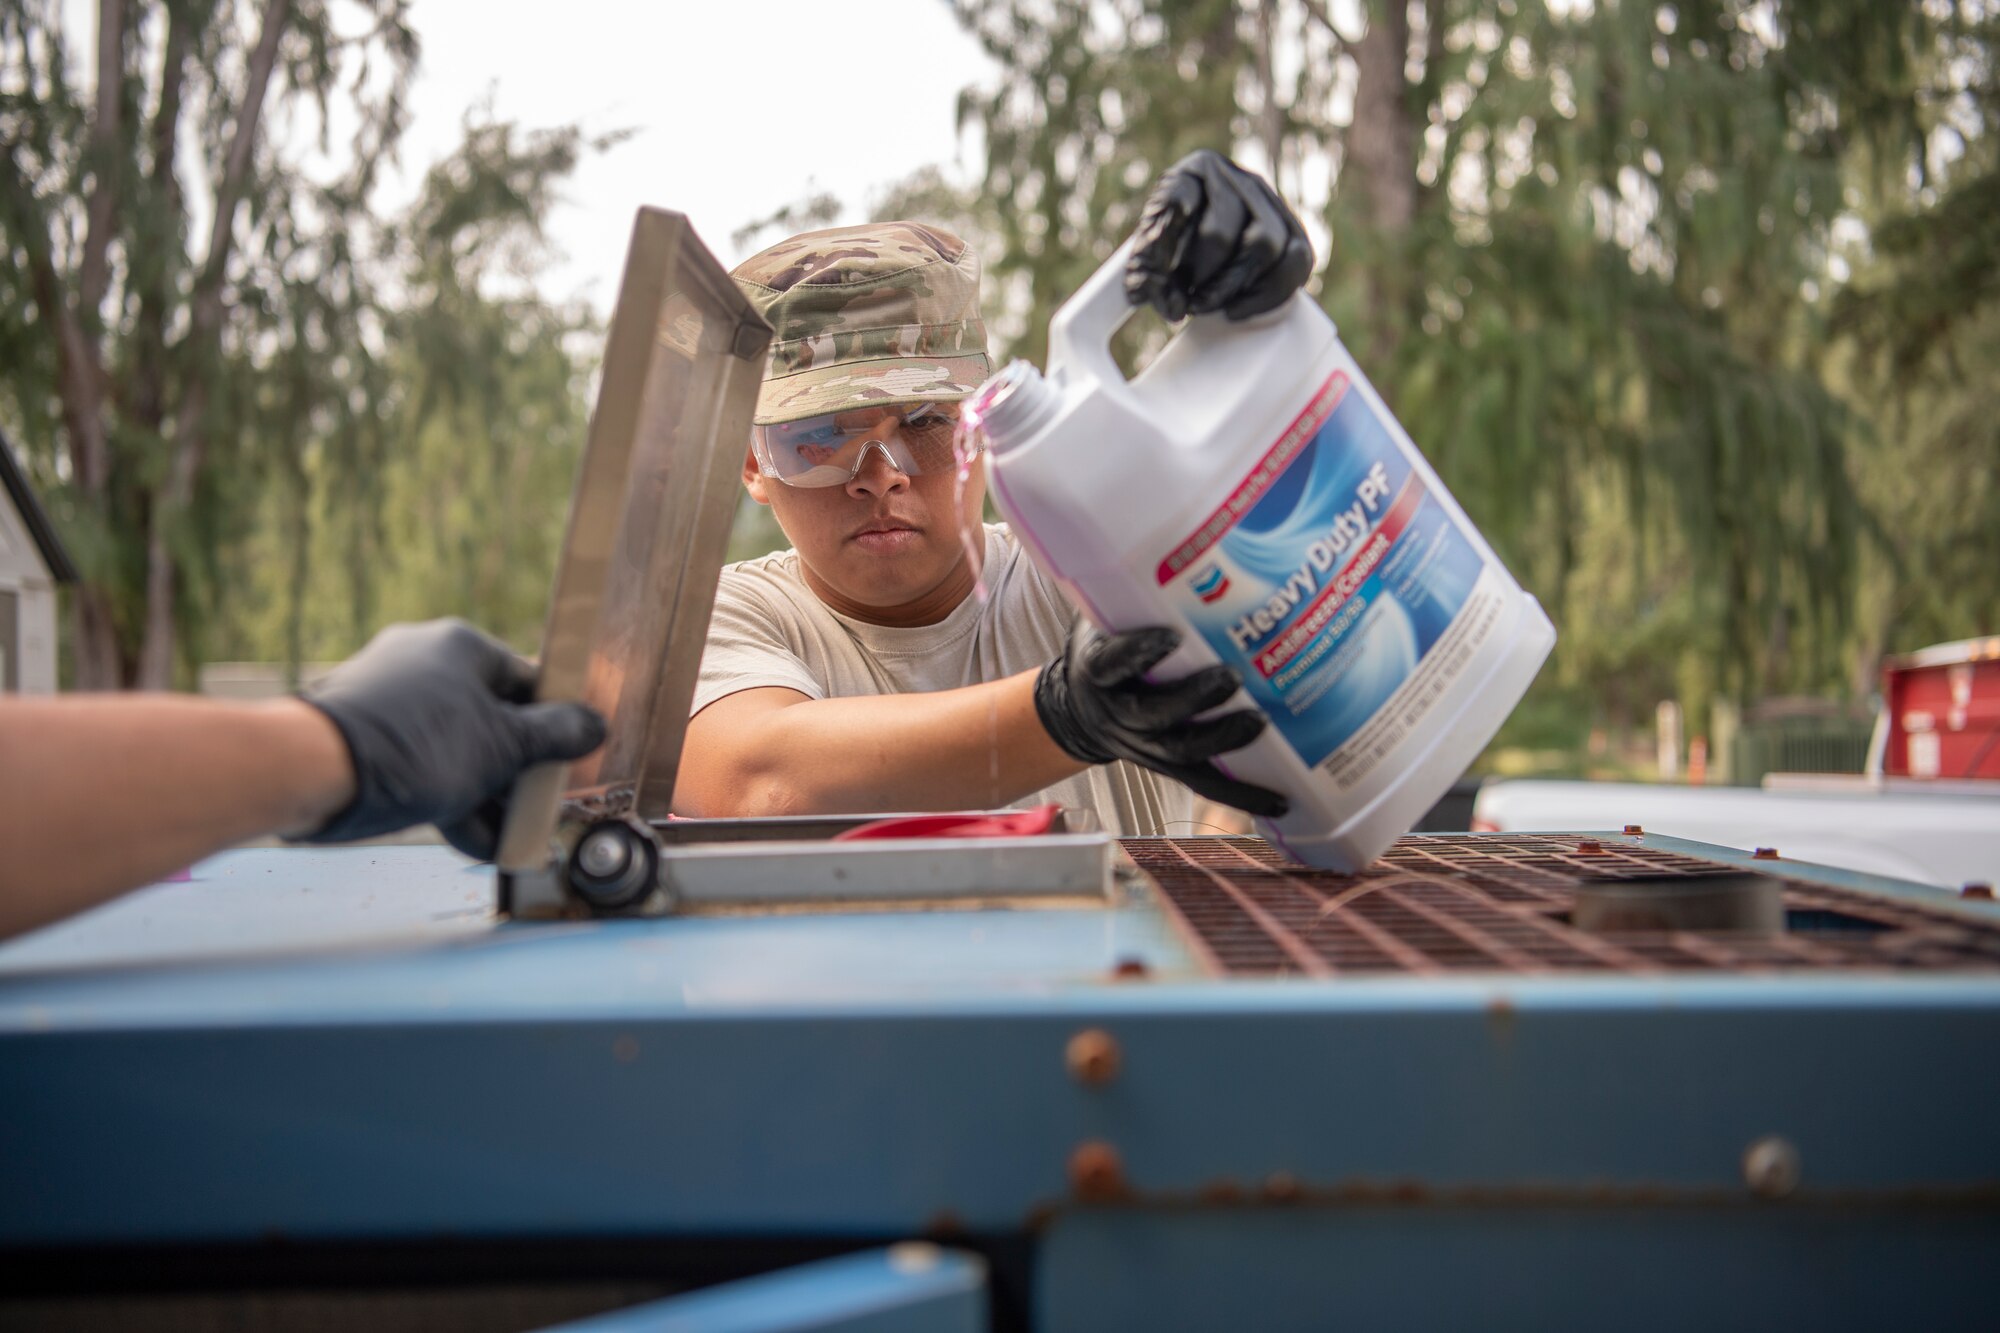 U.S. Air Force Staff Sgt. Gabriel Carias, 624th Civil Engineer Squadron electrical power production craftsman, pours antifreeze into an electrical generator at Bellows Air Force Station, Hawaii, Jan. 25, 2020.